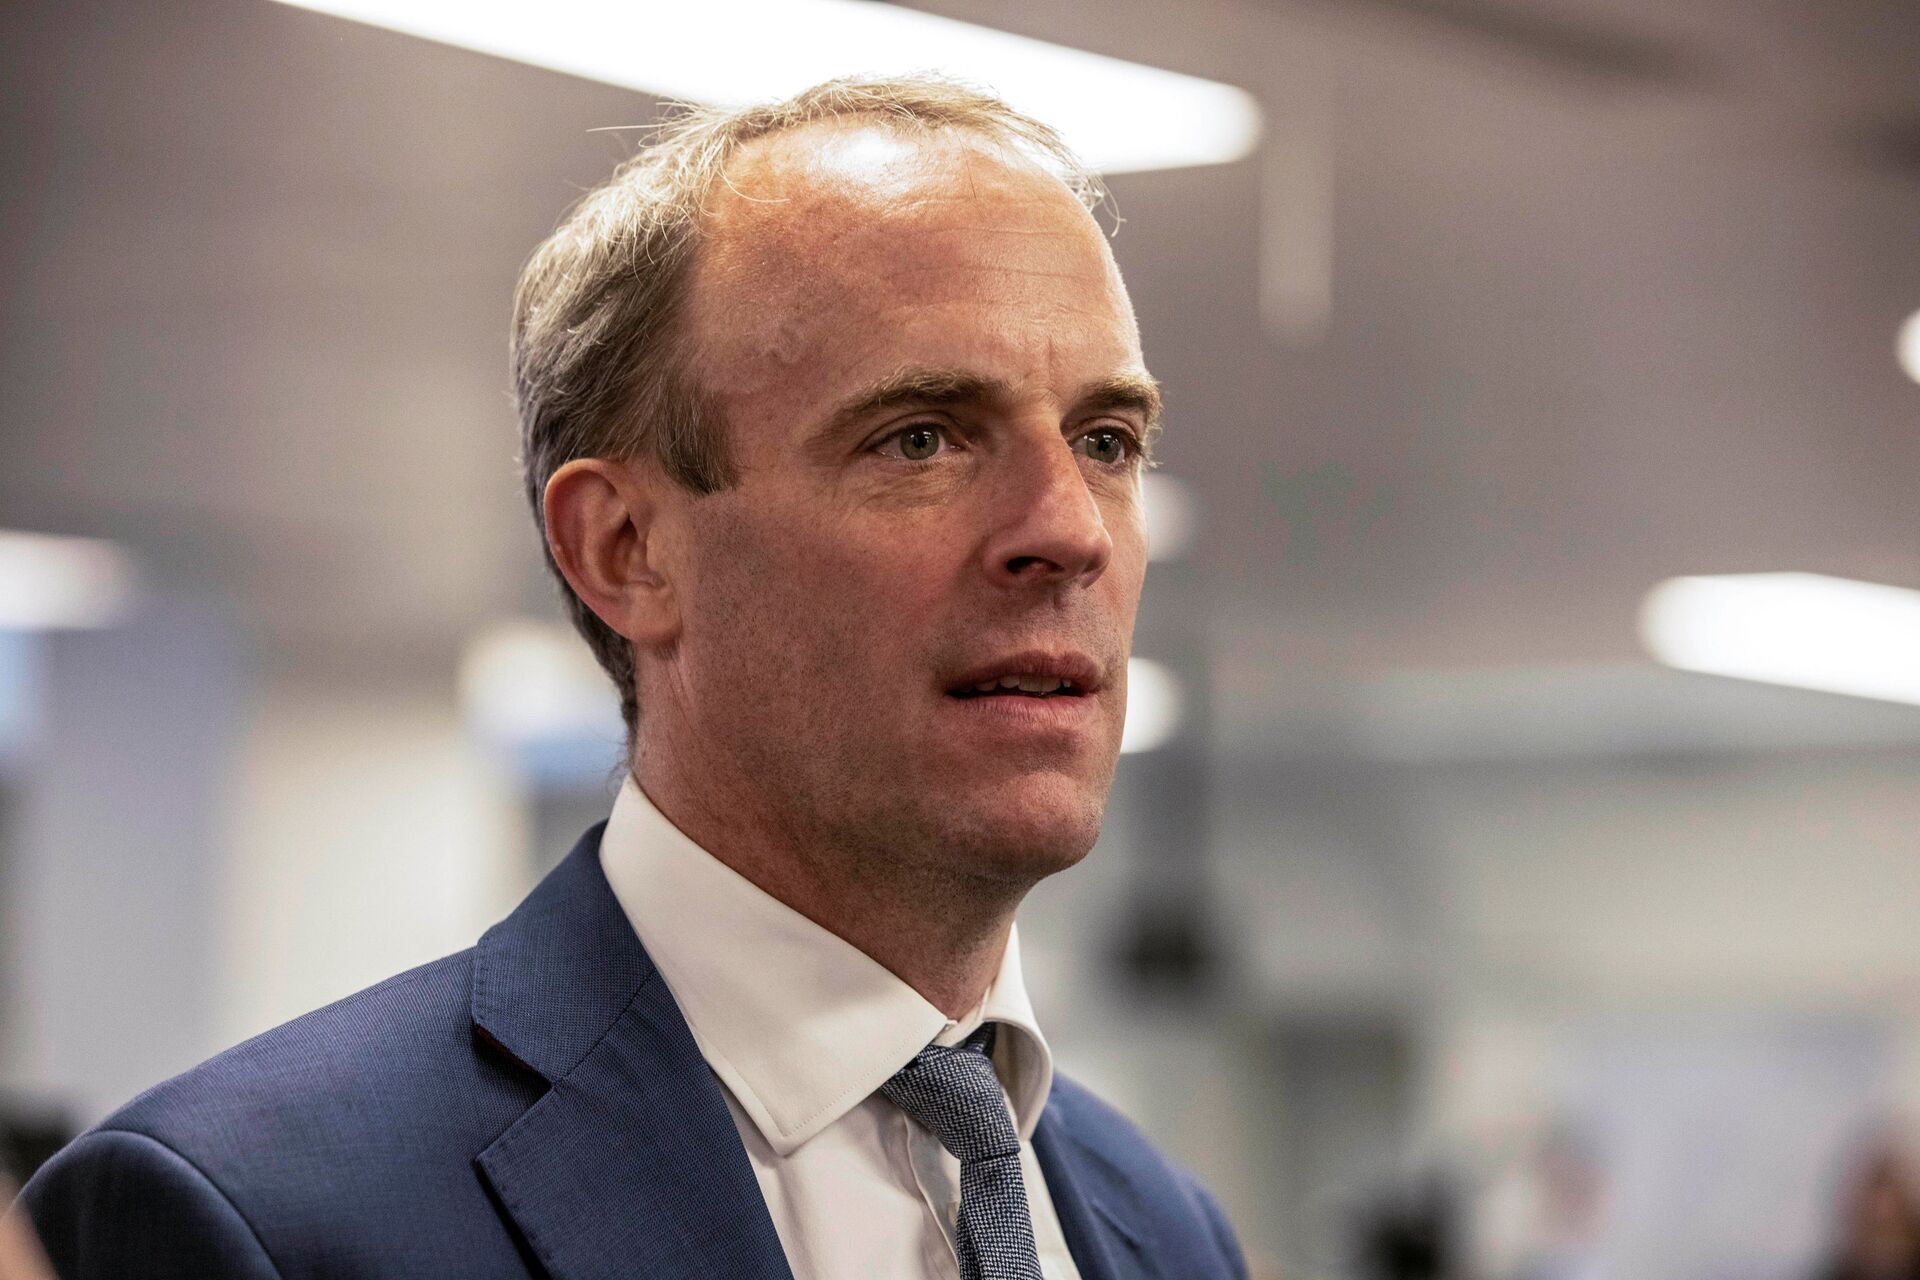 Britain's Foreign Secretary Dominic Raab looks on during a visit of Britain's Prime Minister Boris Johnson at the The Foreign, Commonwealth and Development Office (FCDO) Crisis Centre in London, Britain August 27, 2021 - Sputnik International, 1920, 16.09.2021